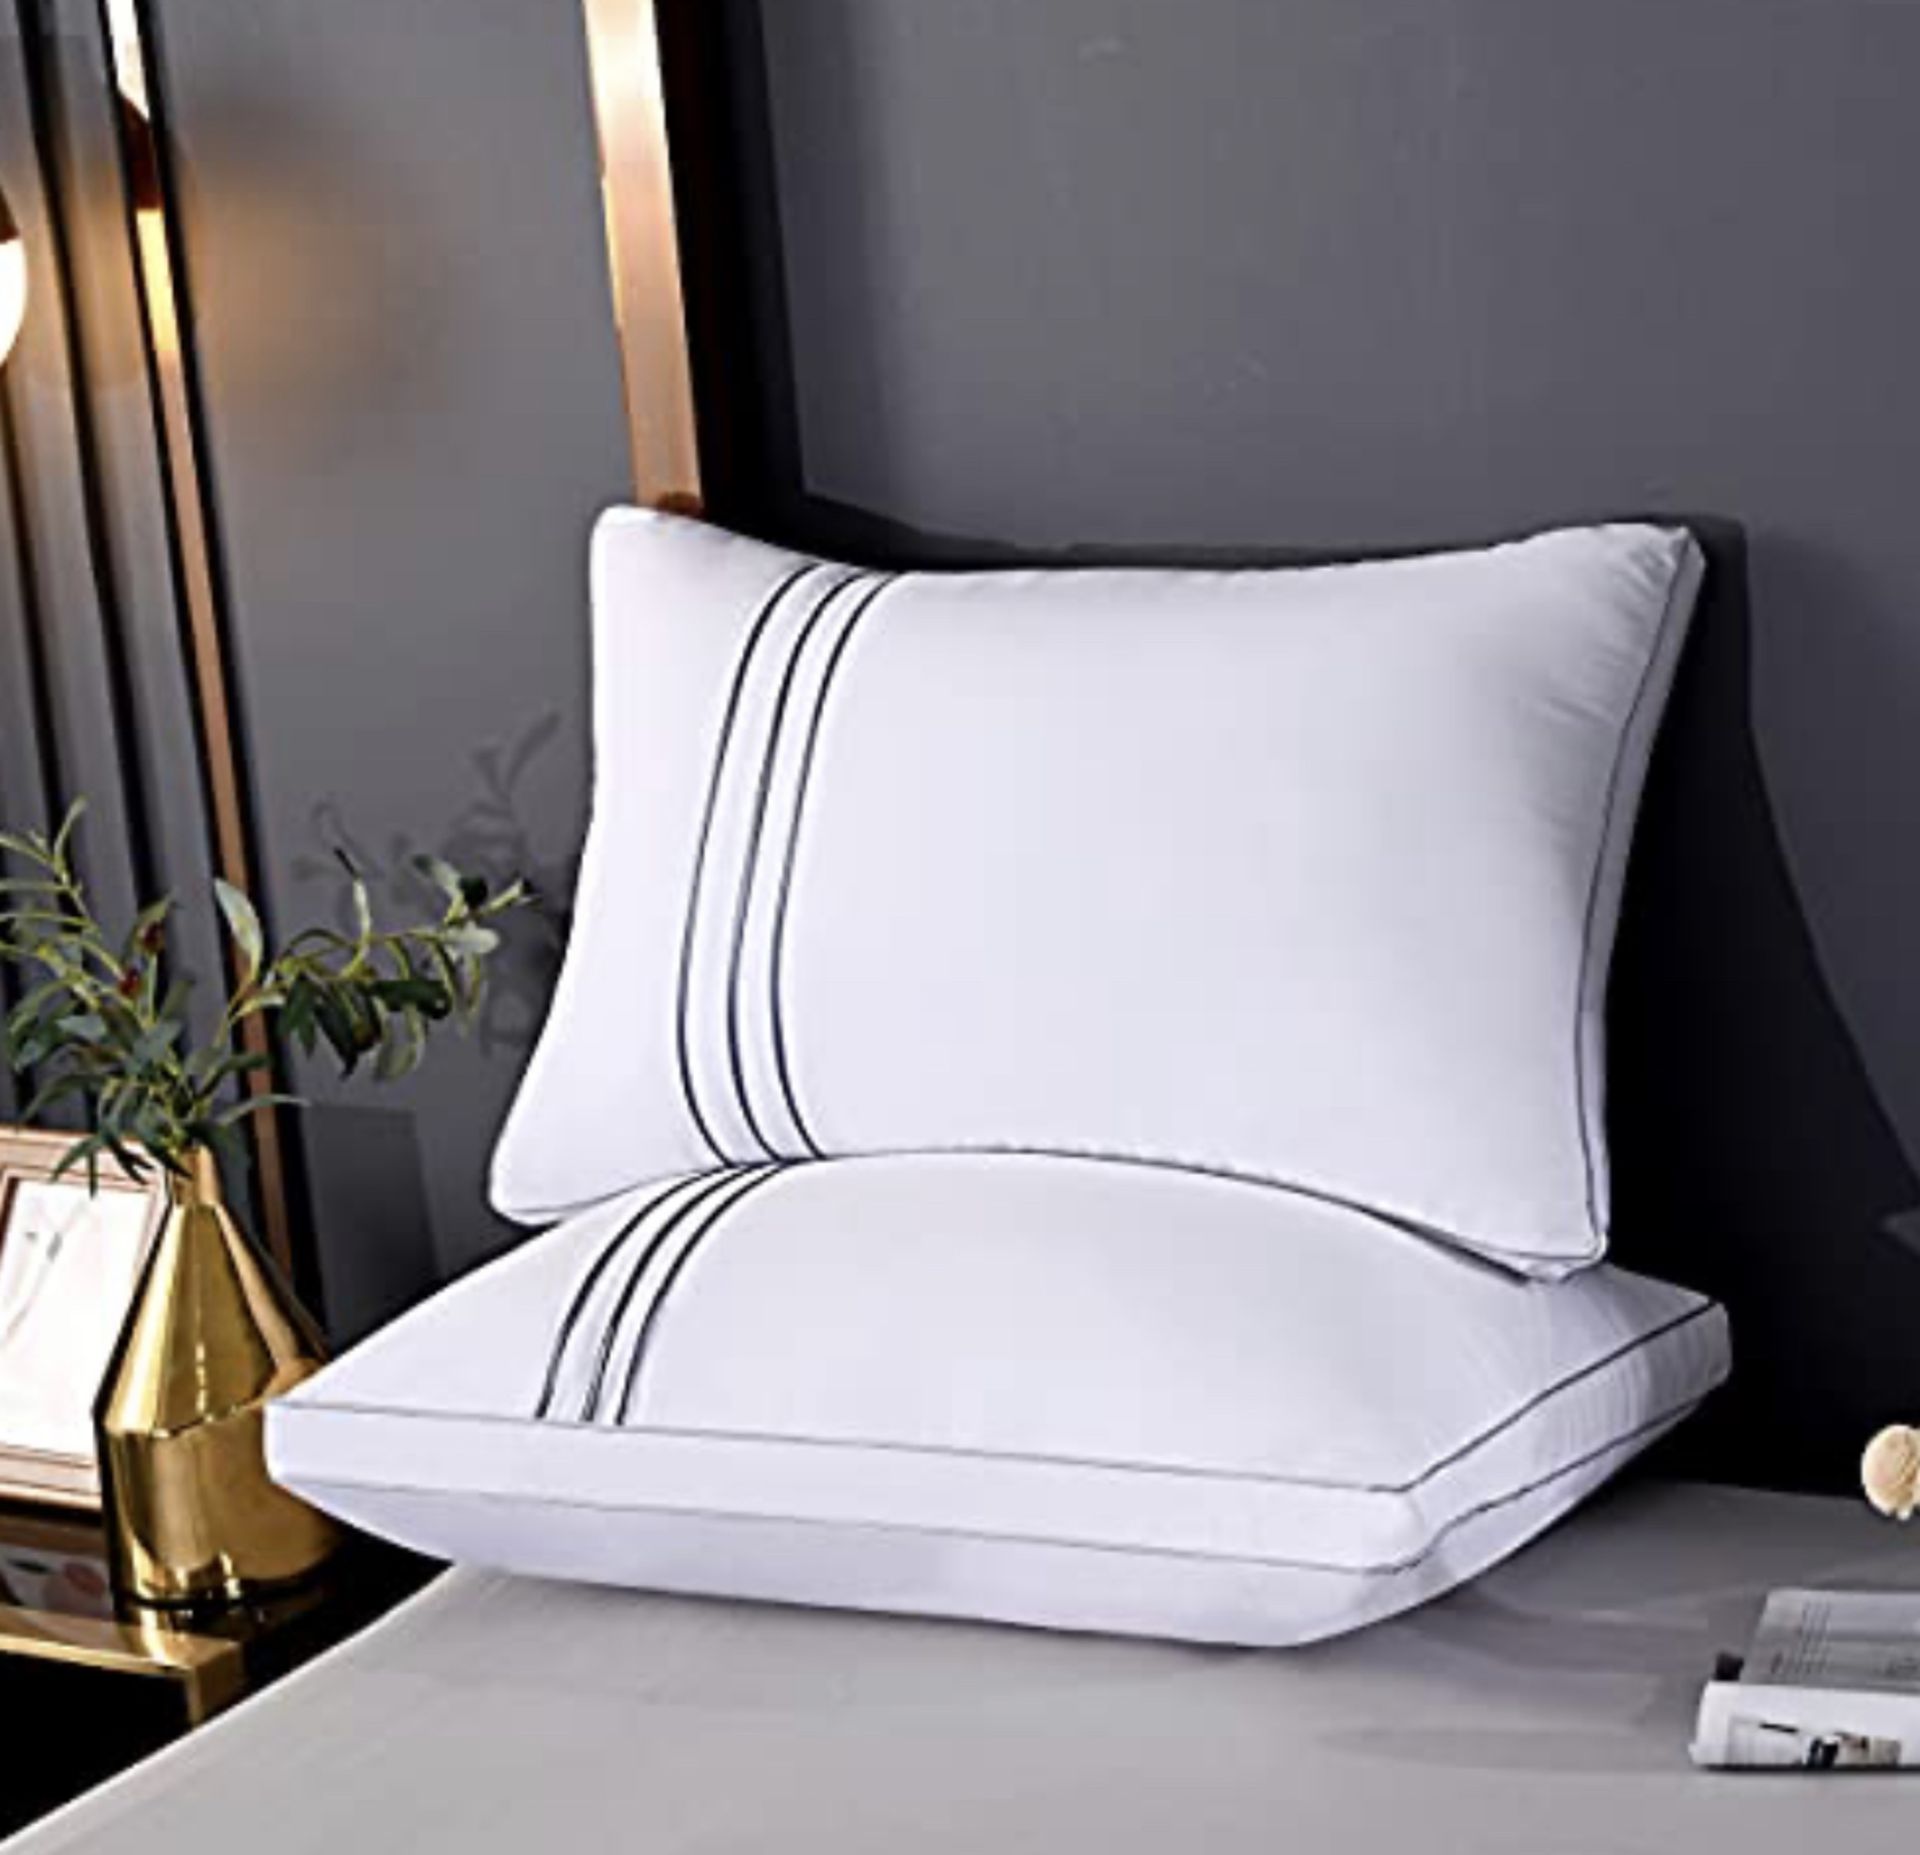 Hypoallergenic Standard Size Hotel Size 2 Pack Pillows